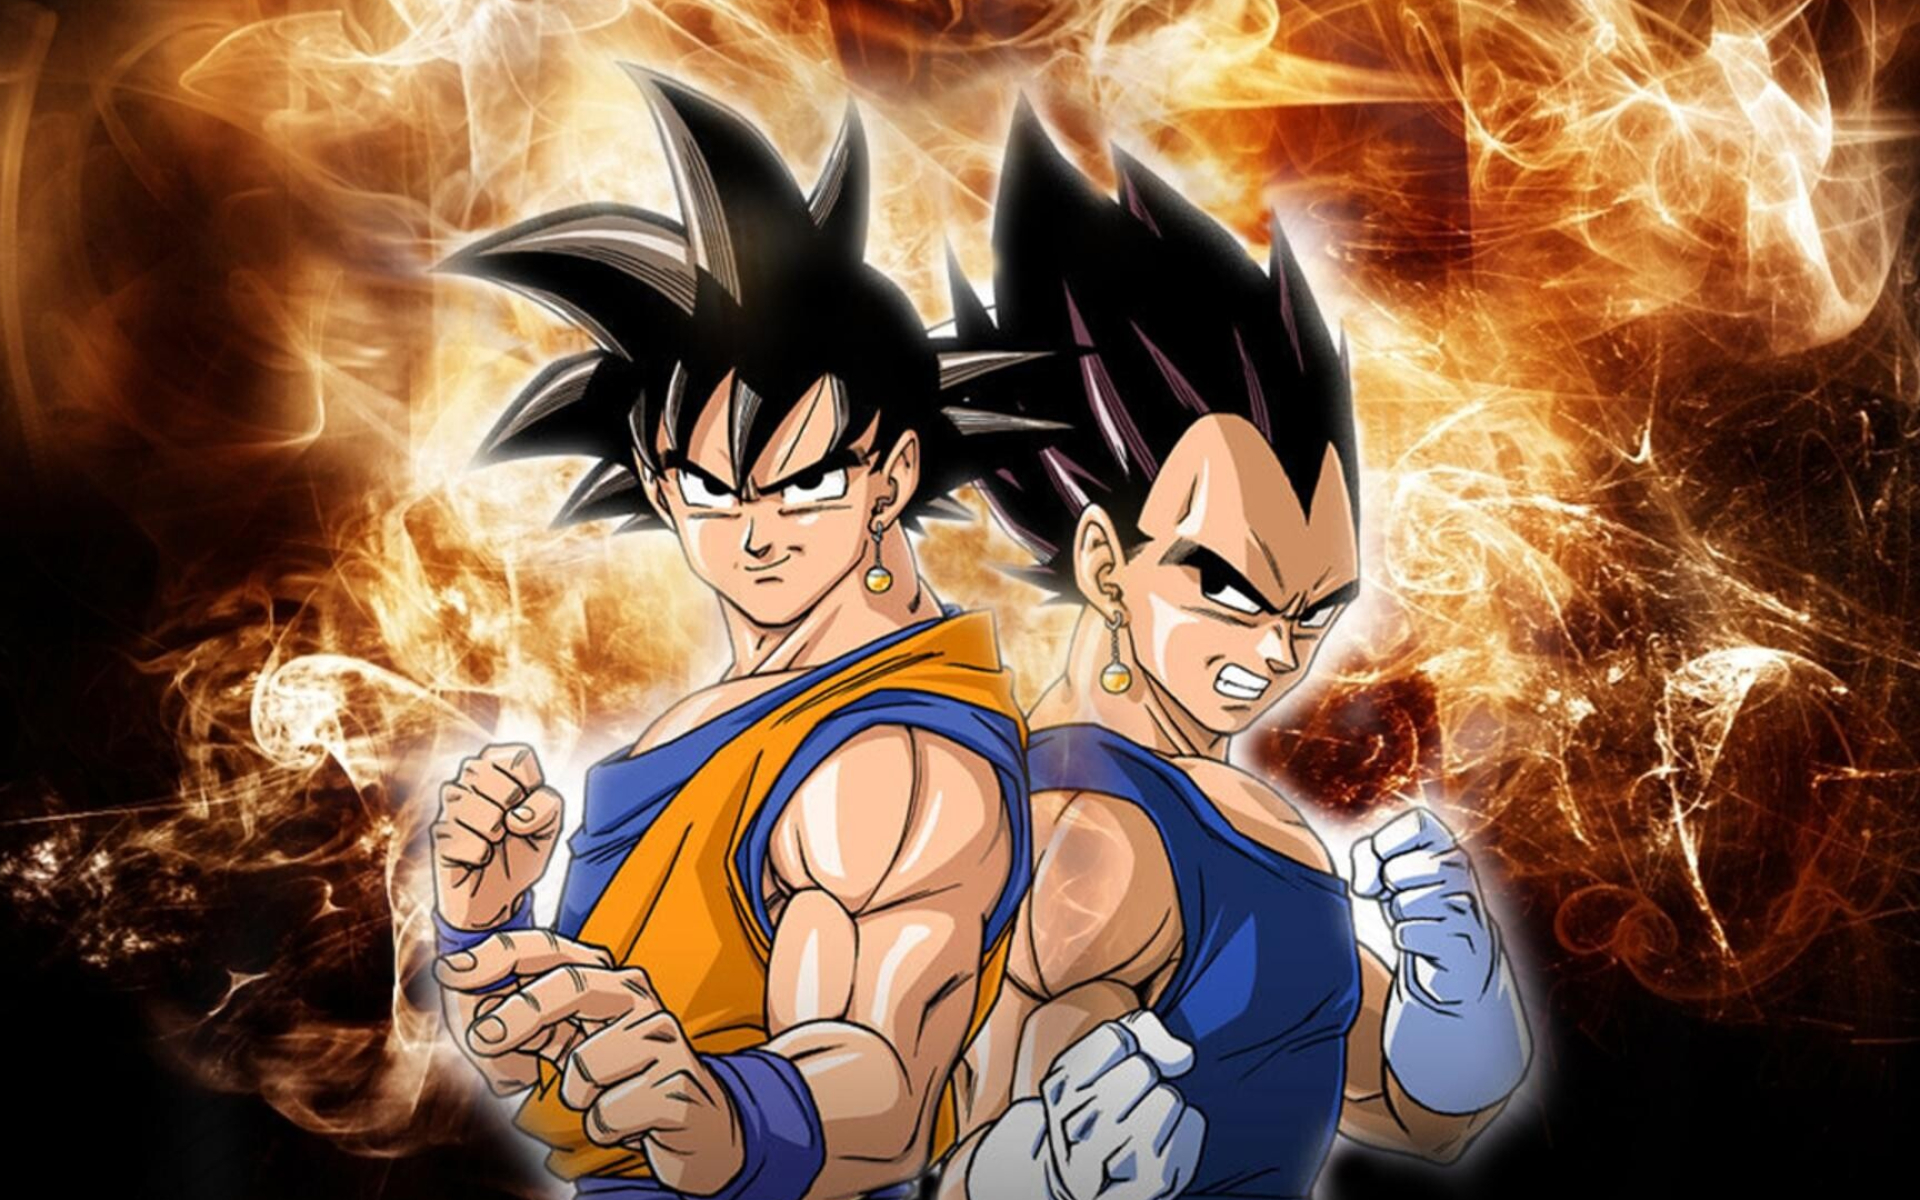 Goku: The most powerful characters of Japanese anime and manga series, Primary protagonists. 1920x1200 HD Wallpaper.